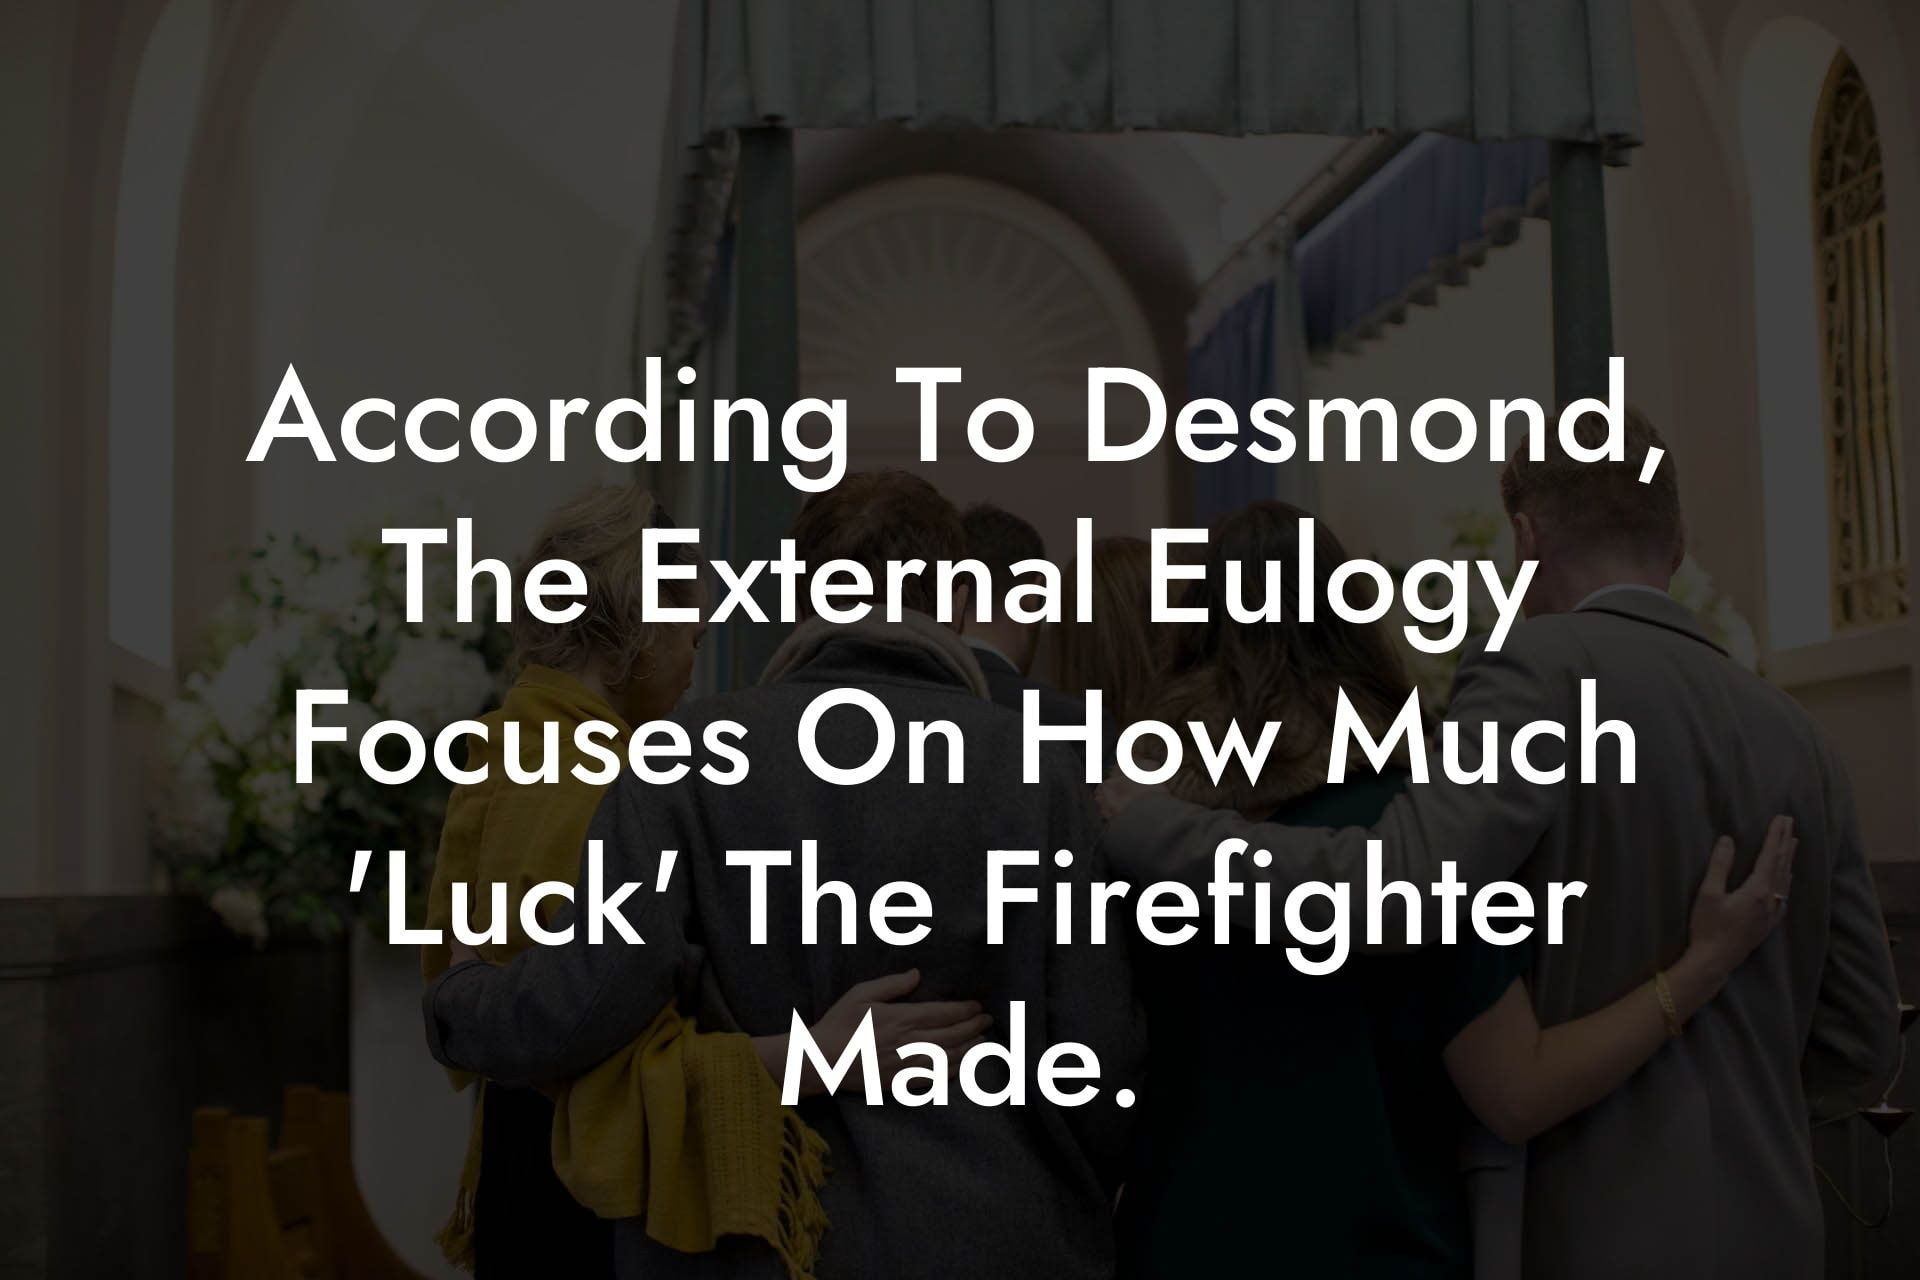 According To Desmond, The External Eulogy Focuses On How Much 'Luck' The Firefighter Made.